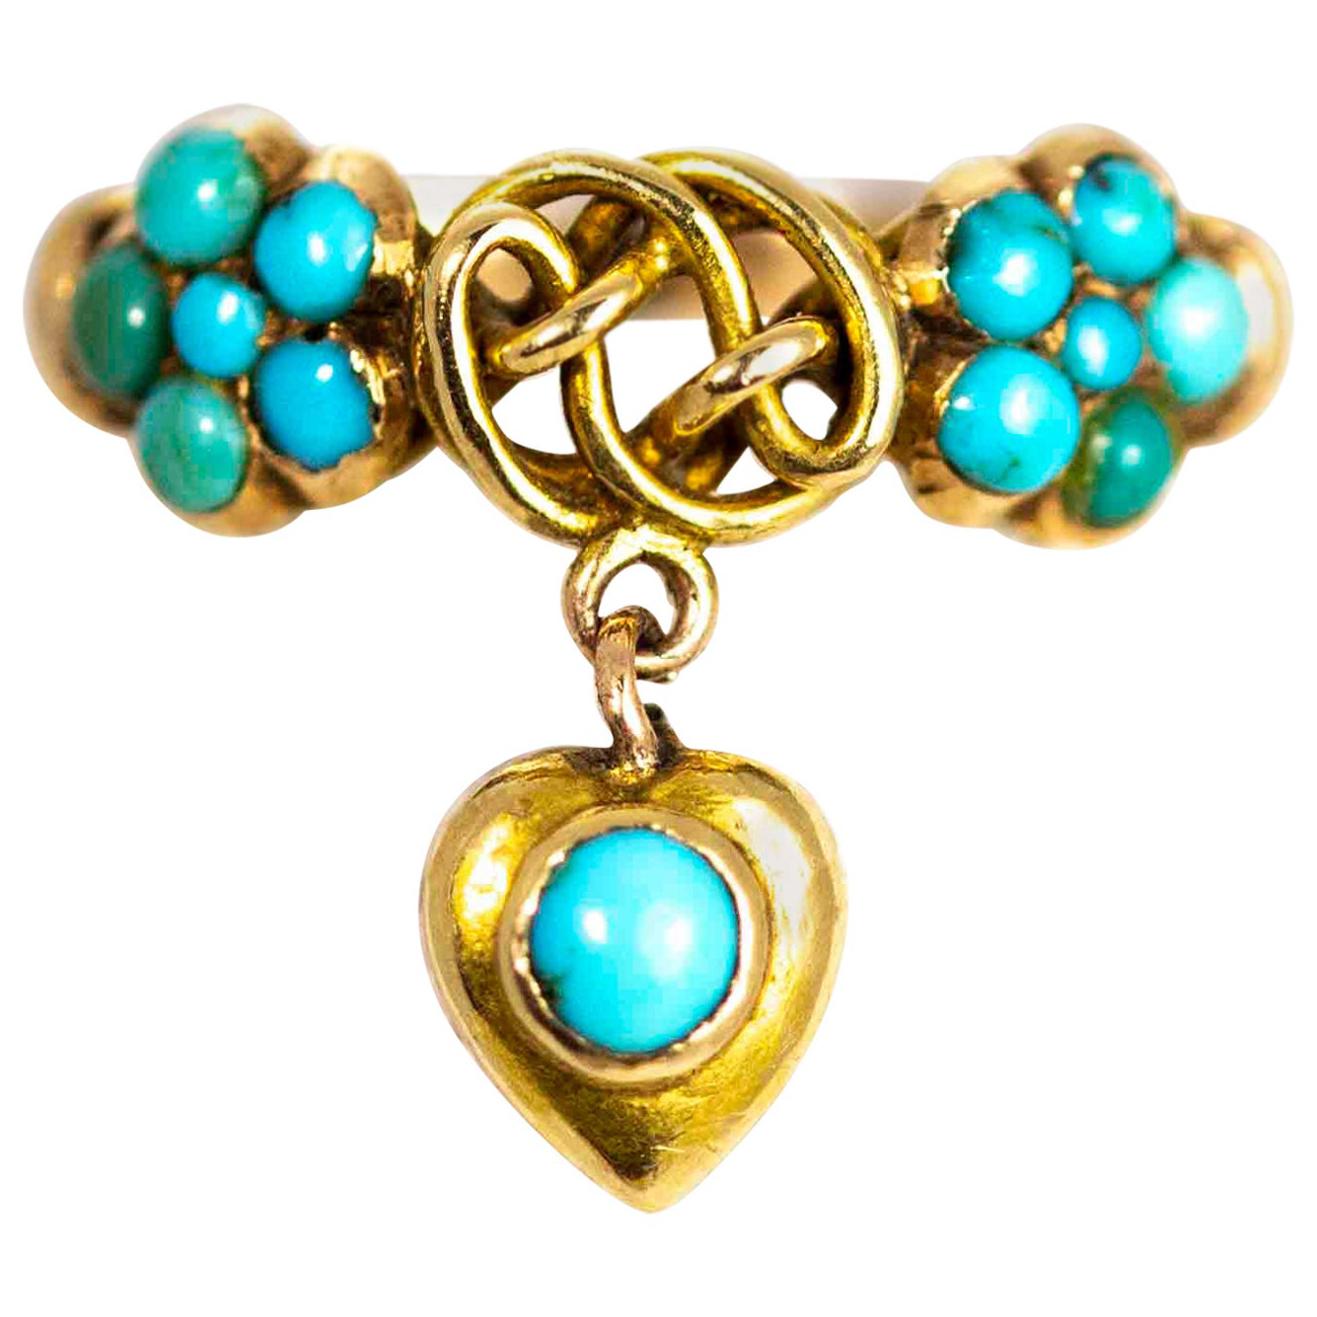 Vintage 15 Carat Gold Turquoise Lover's Knot Ring